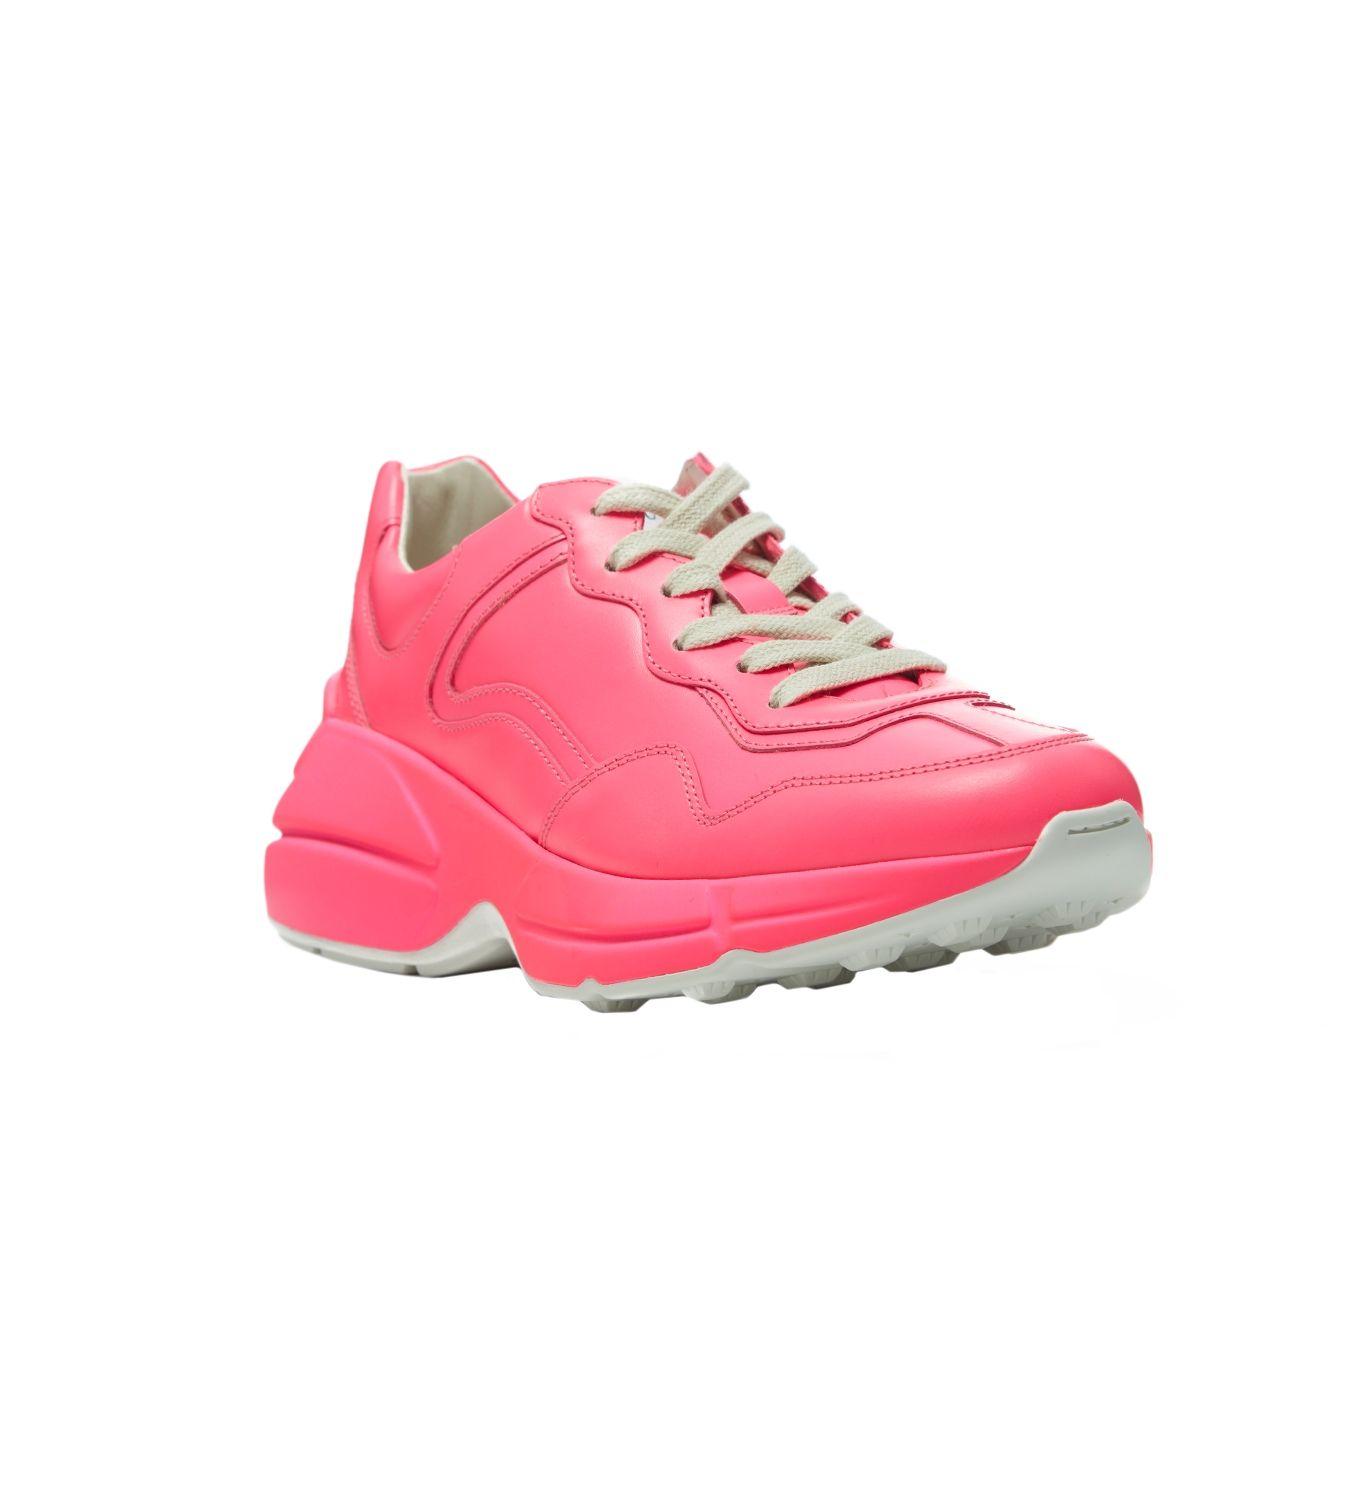 Gucci Rhyton Fluorescent Leather Sneaker in Pink - Lyst